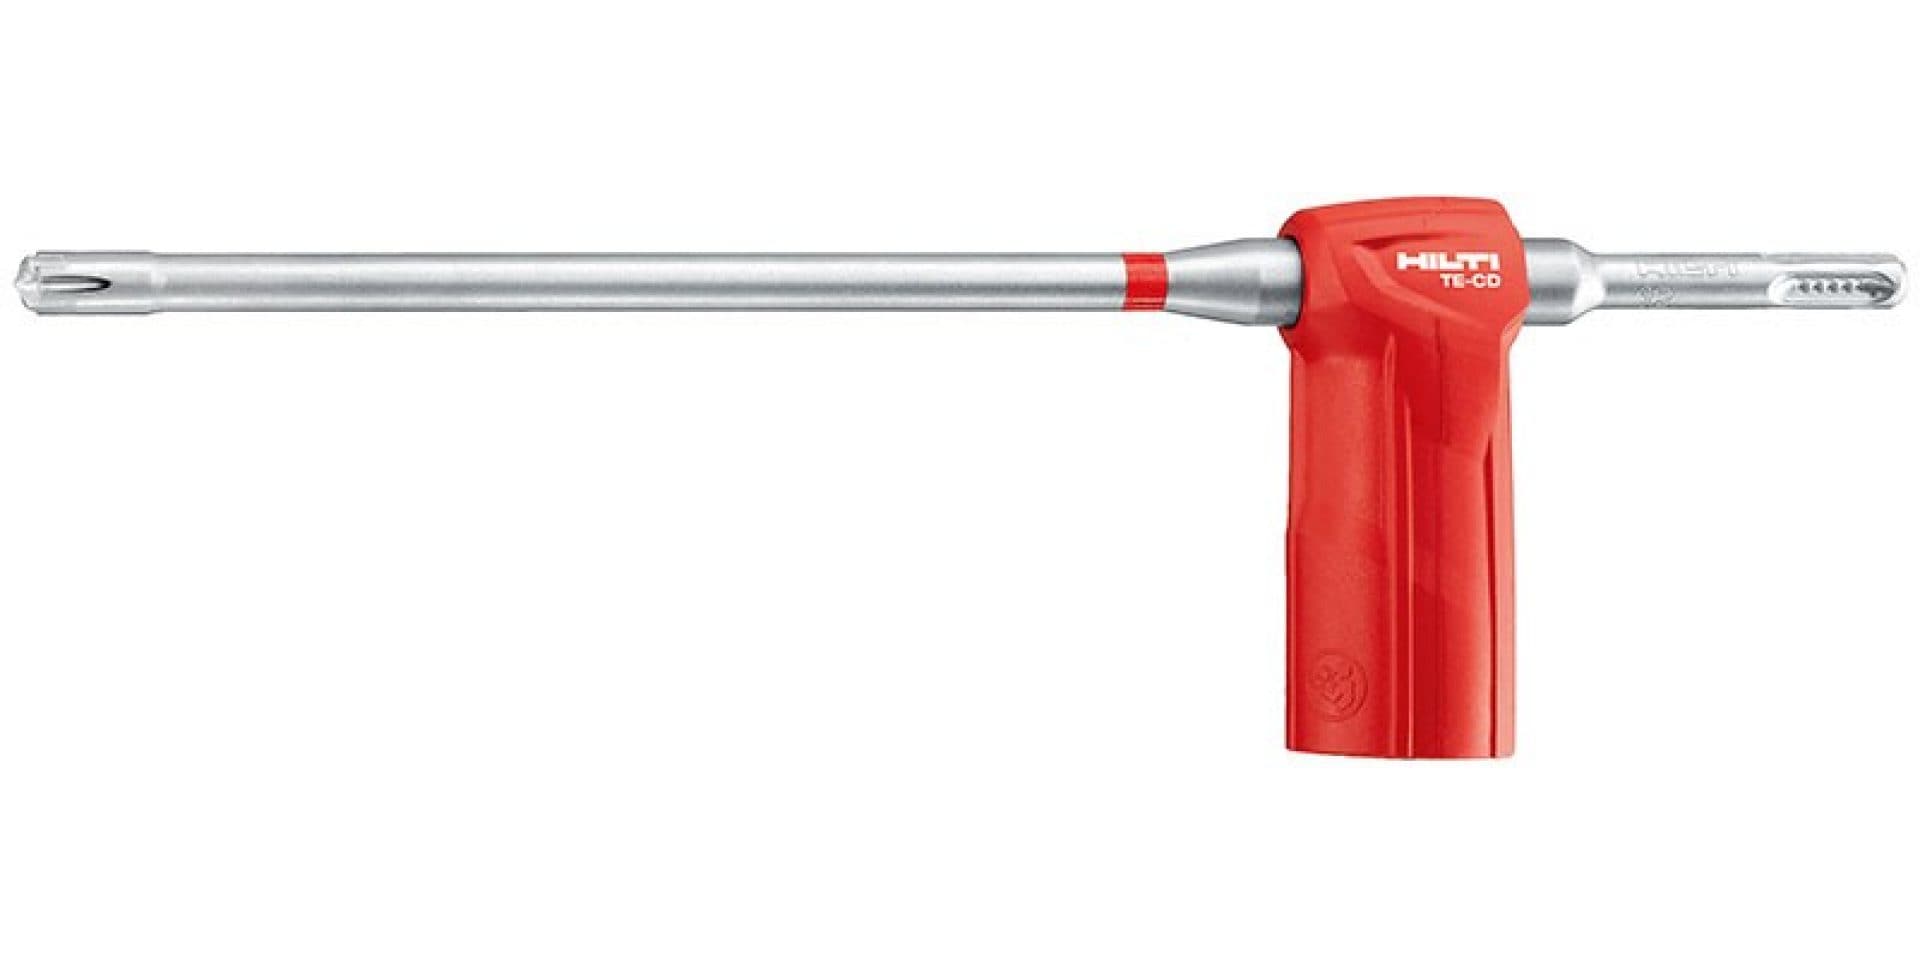 TE-CD drill bit as part of the Hilti SafeSet systems, for drilling in reinforced concrete